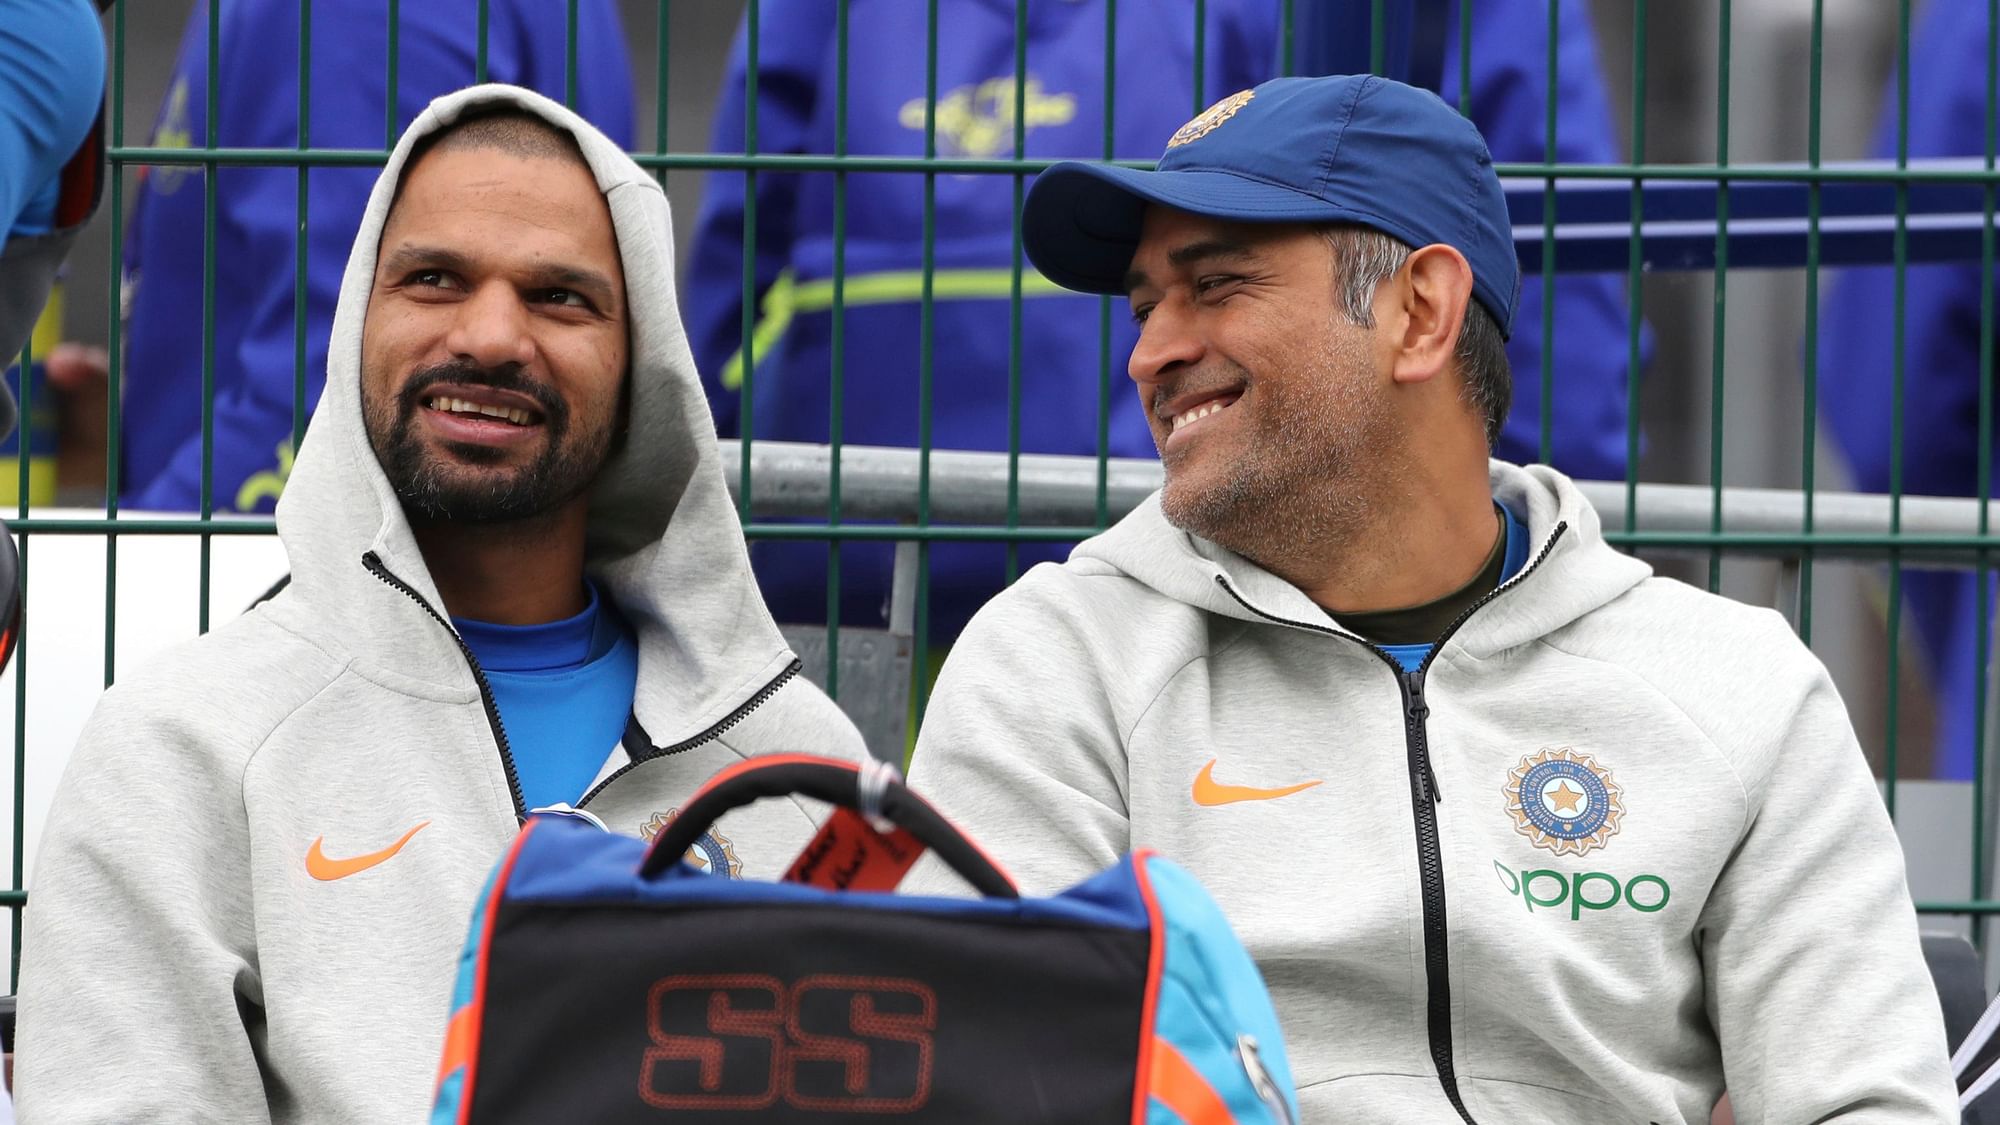 The decision to call time on his illustrious international career is Mahendra Singh Dhoni’s alone, says Shikhar Dhawan.